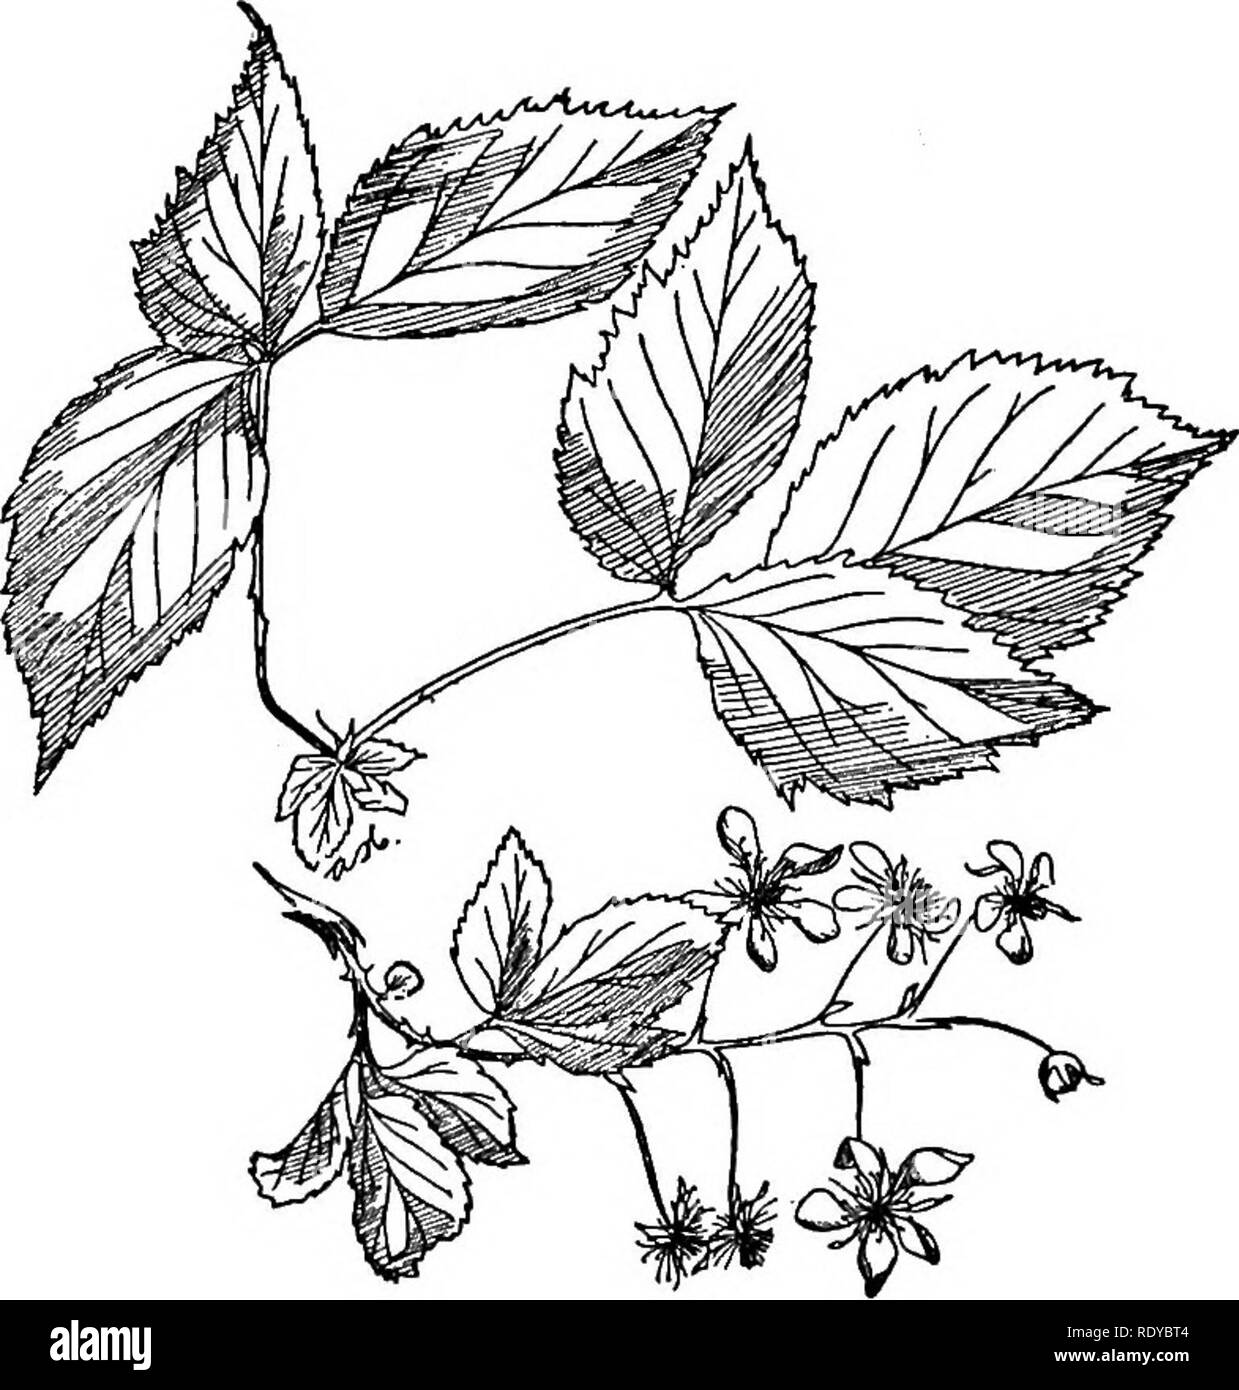 . A manual of poisonous plants, chiefly of eastern North America, with brief notes on economic and medicinal plants, and numerous illustrations. Poisonous plants. 508 MANUAI. OF POISONOUS PLANTS troublesome in fields for several years in the north and persists for a long time in gardens. A common native of the north. Rubus occidentalis L. Black Raspberry, or Black-cap Raspberry Stems biennial, glaucus, recurved, beset with hooked prickles; rooting at the tip; leaves pinnately 3-foliolate, or rarely S-foliolate; leaflets ovate, coarsely doubly serrate, whitish underneath; flowers corymbose clus Stock Photo